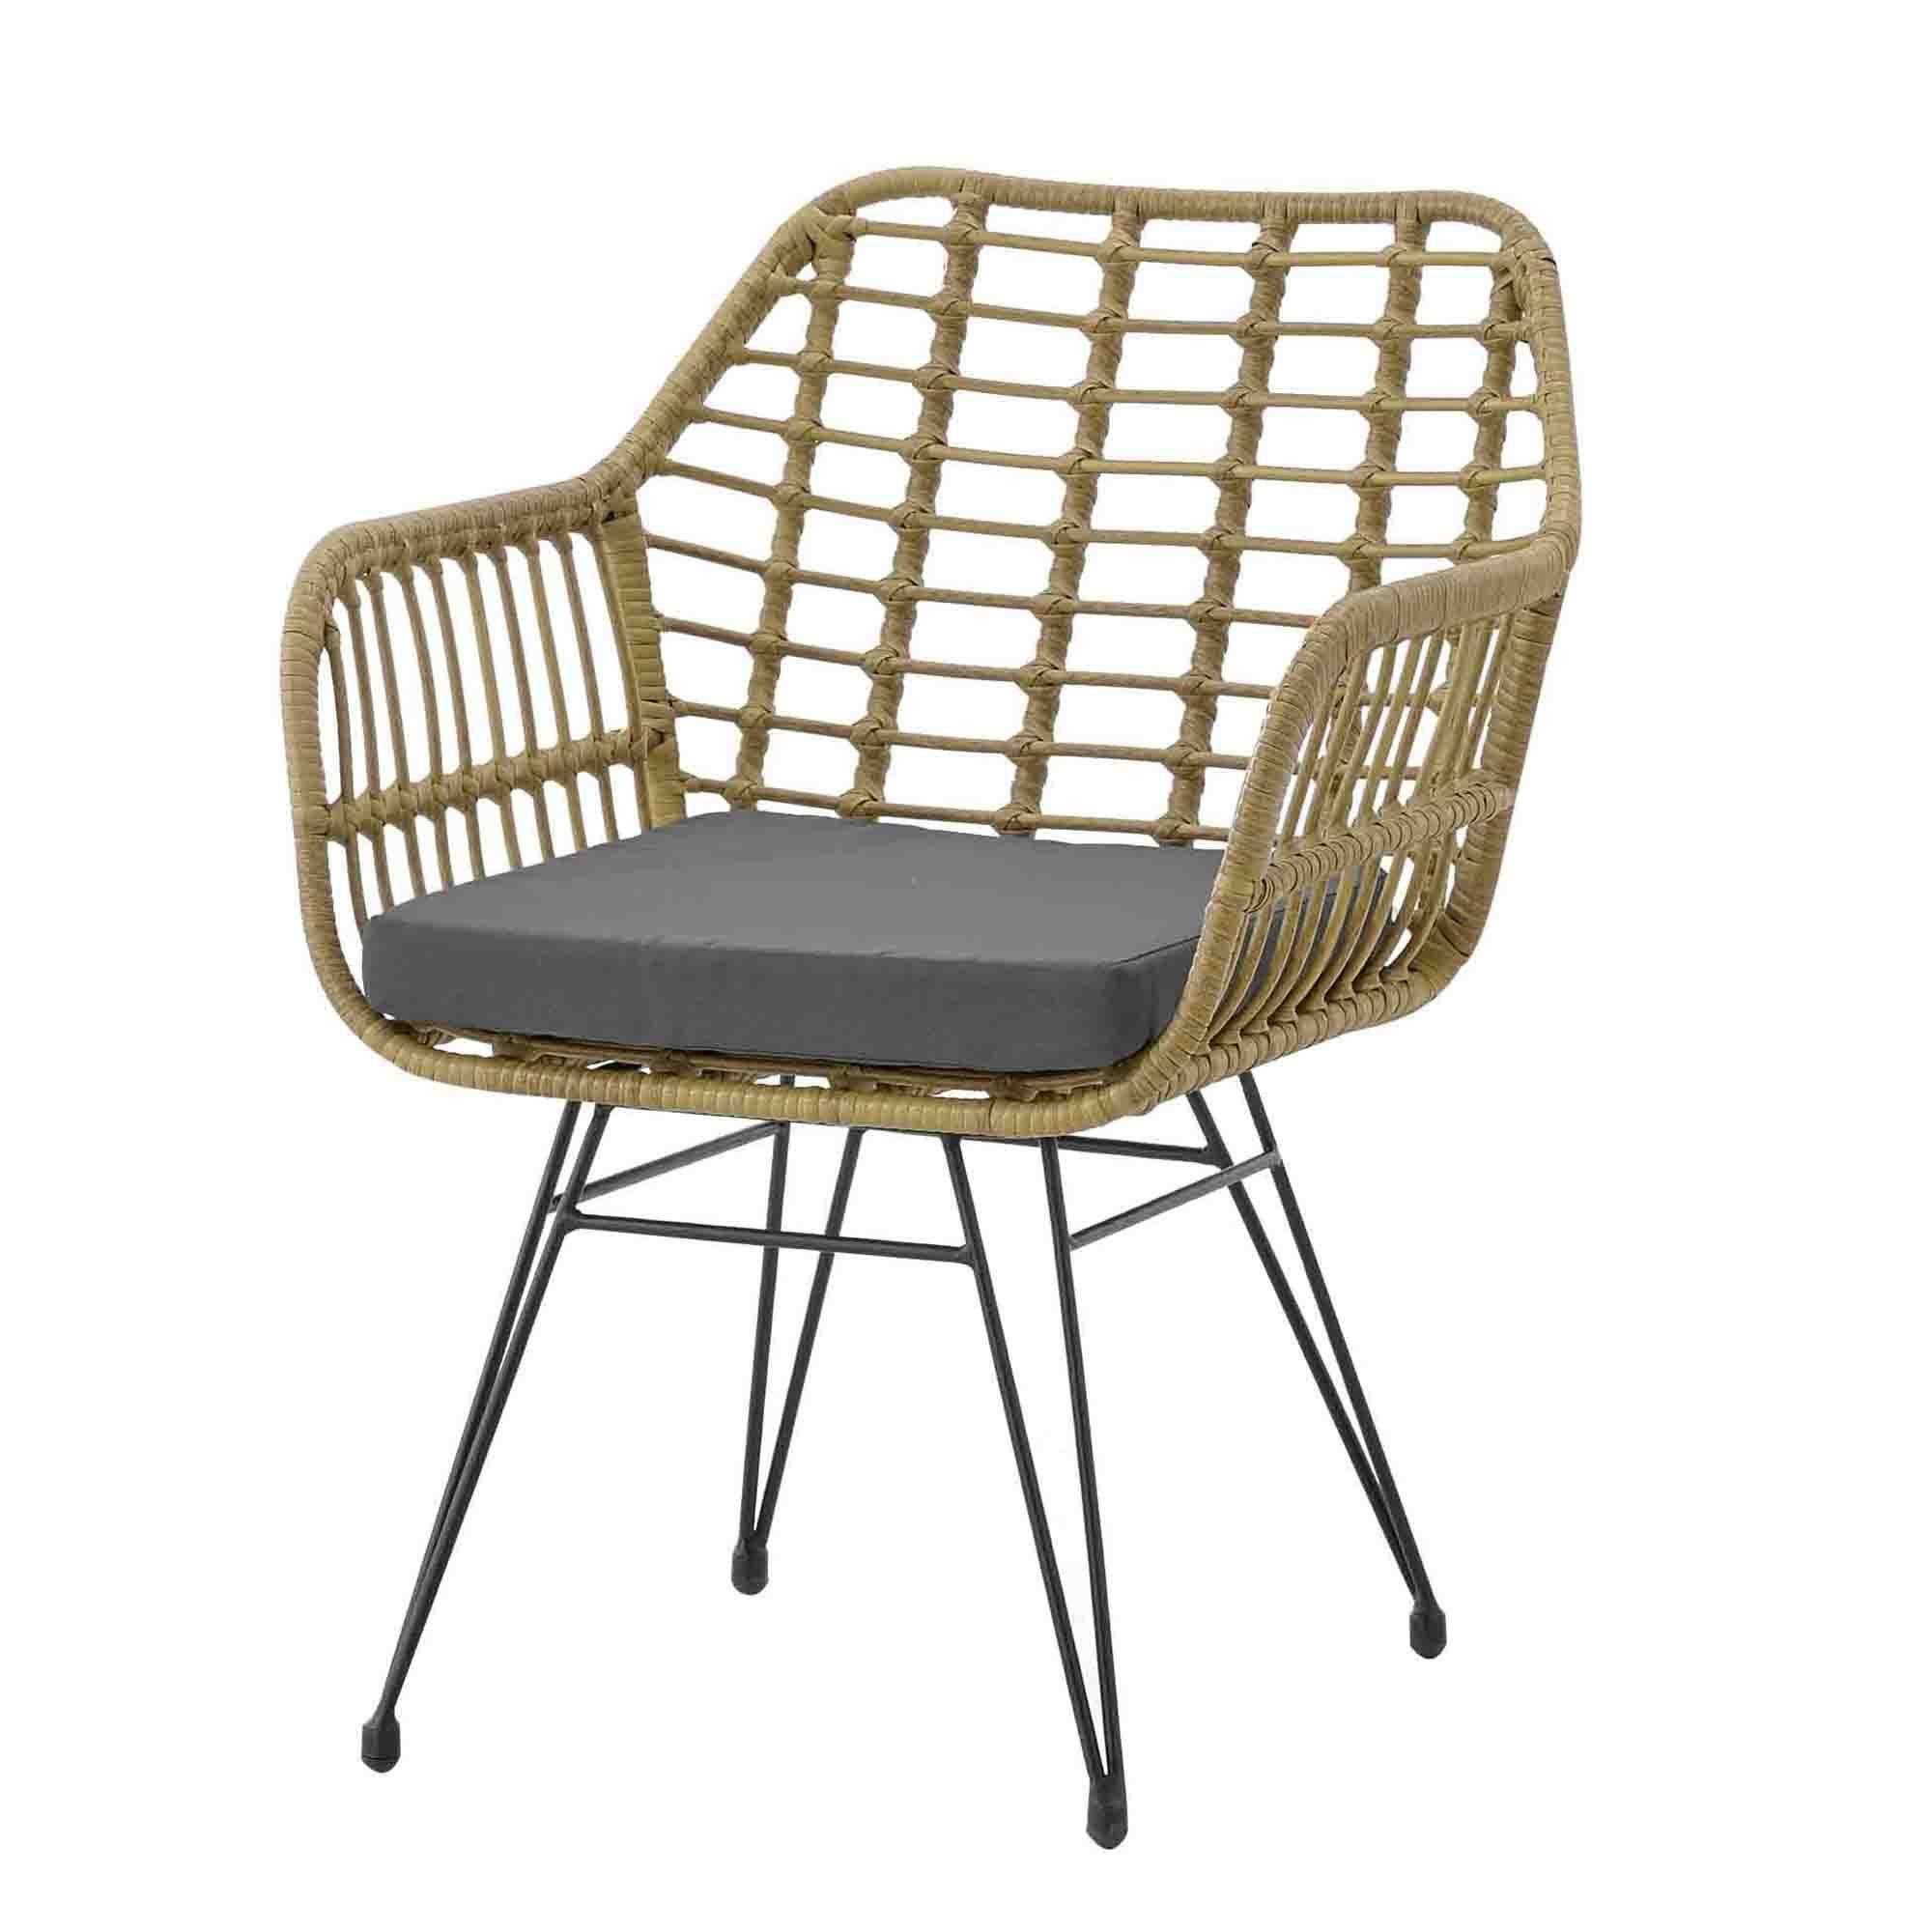 Aukfa 3 Pieces table set,Modern Rattan Coffee Chair Table Set,Outdoor Furniture Rattan Chair,Garden Set with Two Chair and One Table,Conversation Set - image 4 of 9